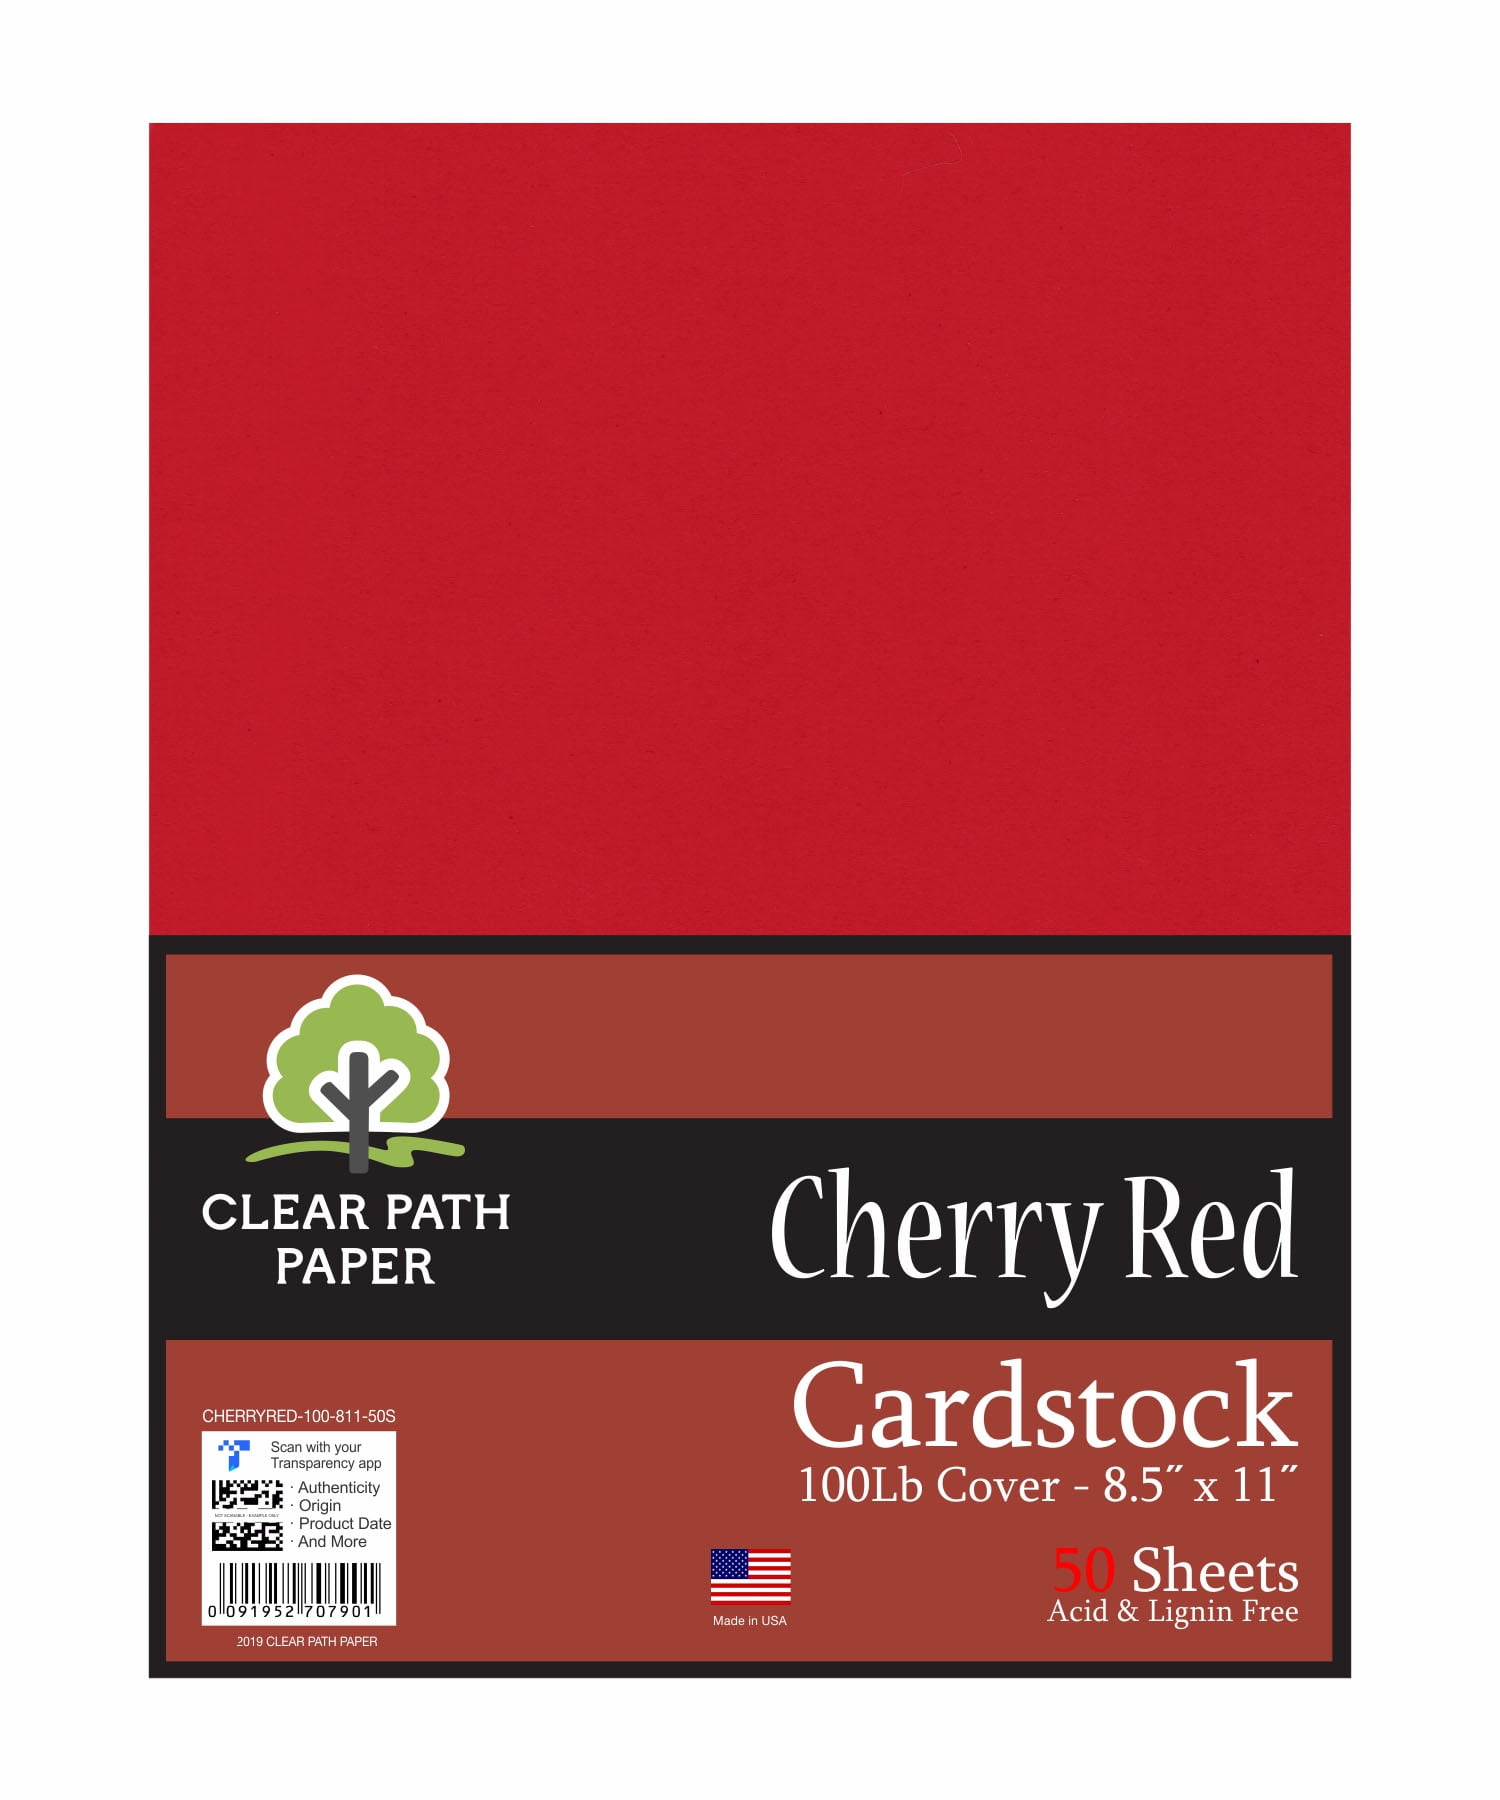 80Lb Cover 8.5 x 11 inch Rust Red Cardstock 100 Sheets Clear Path Paper 